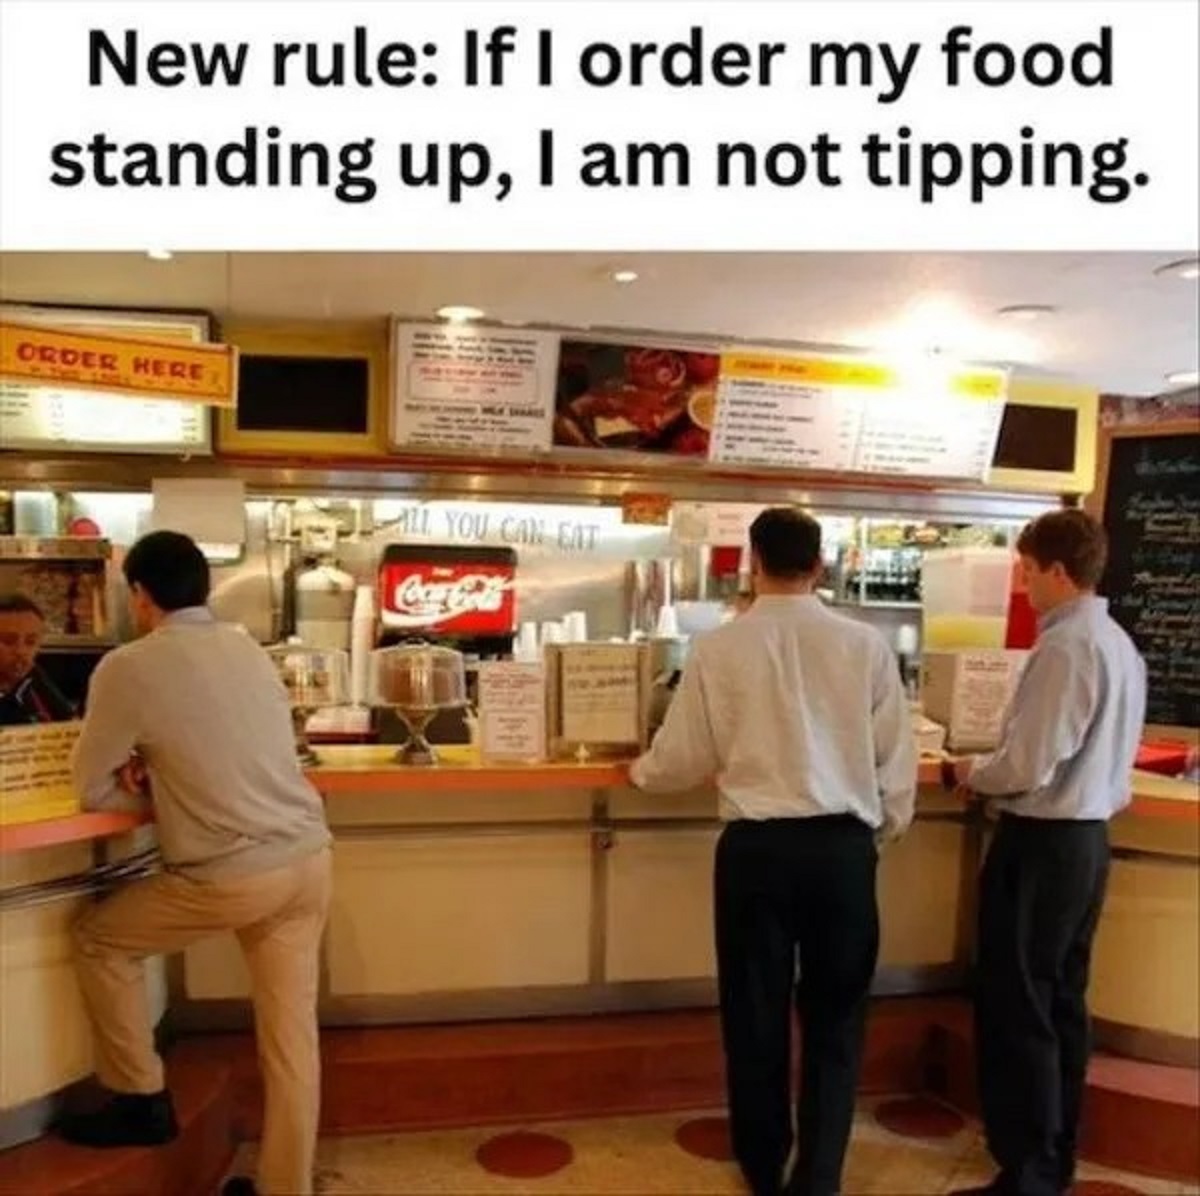 fast food restaurant - New rule If I order my food standing up, I am not tipping. Order Here Tall You Can Eat CocaCola